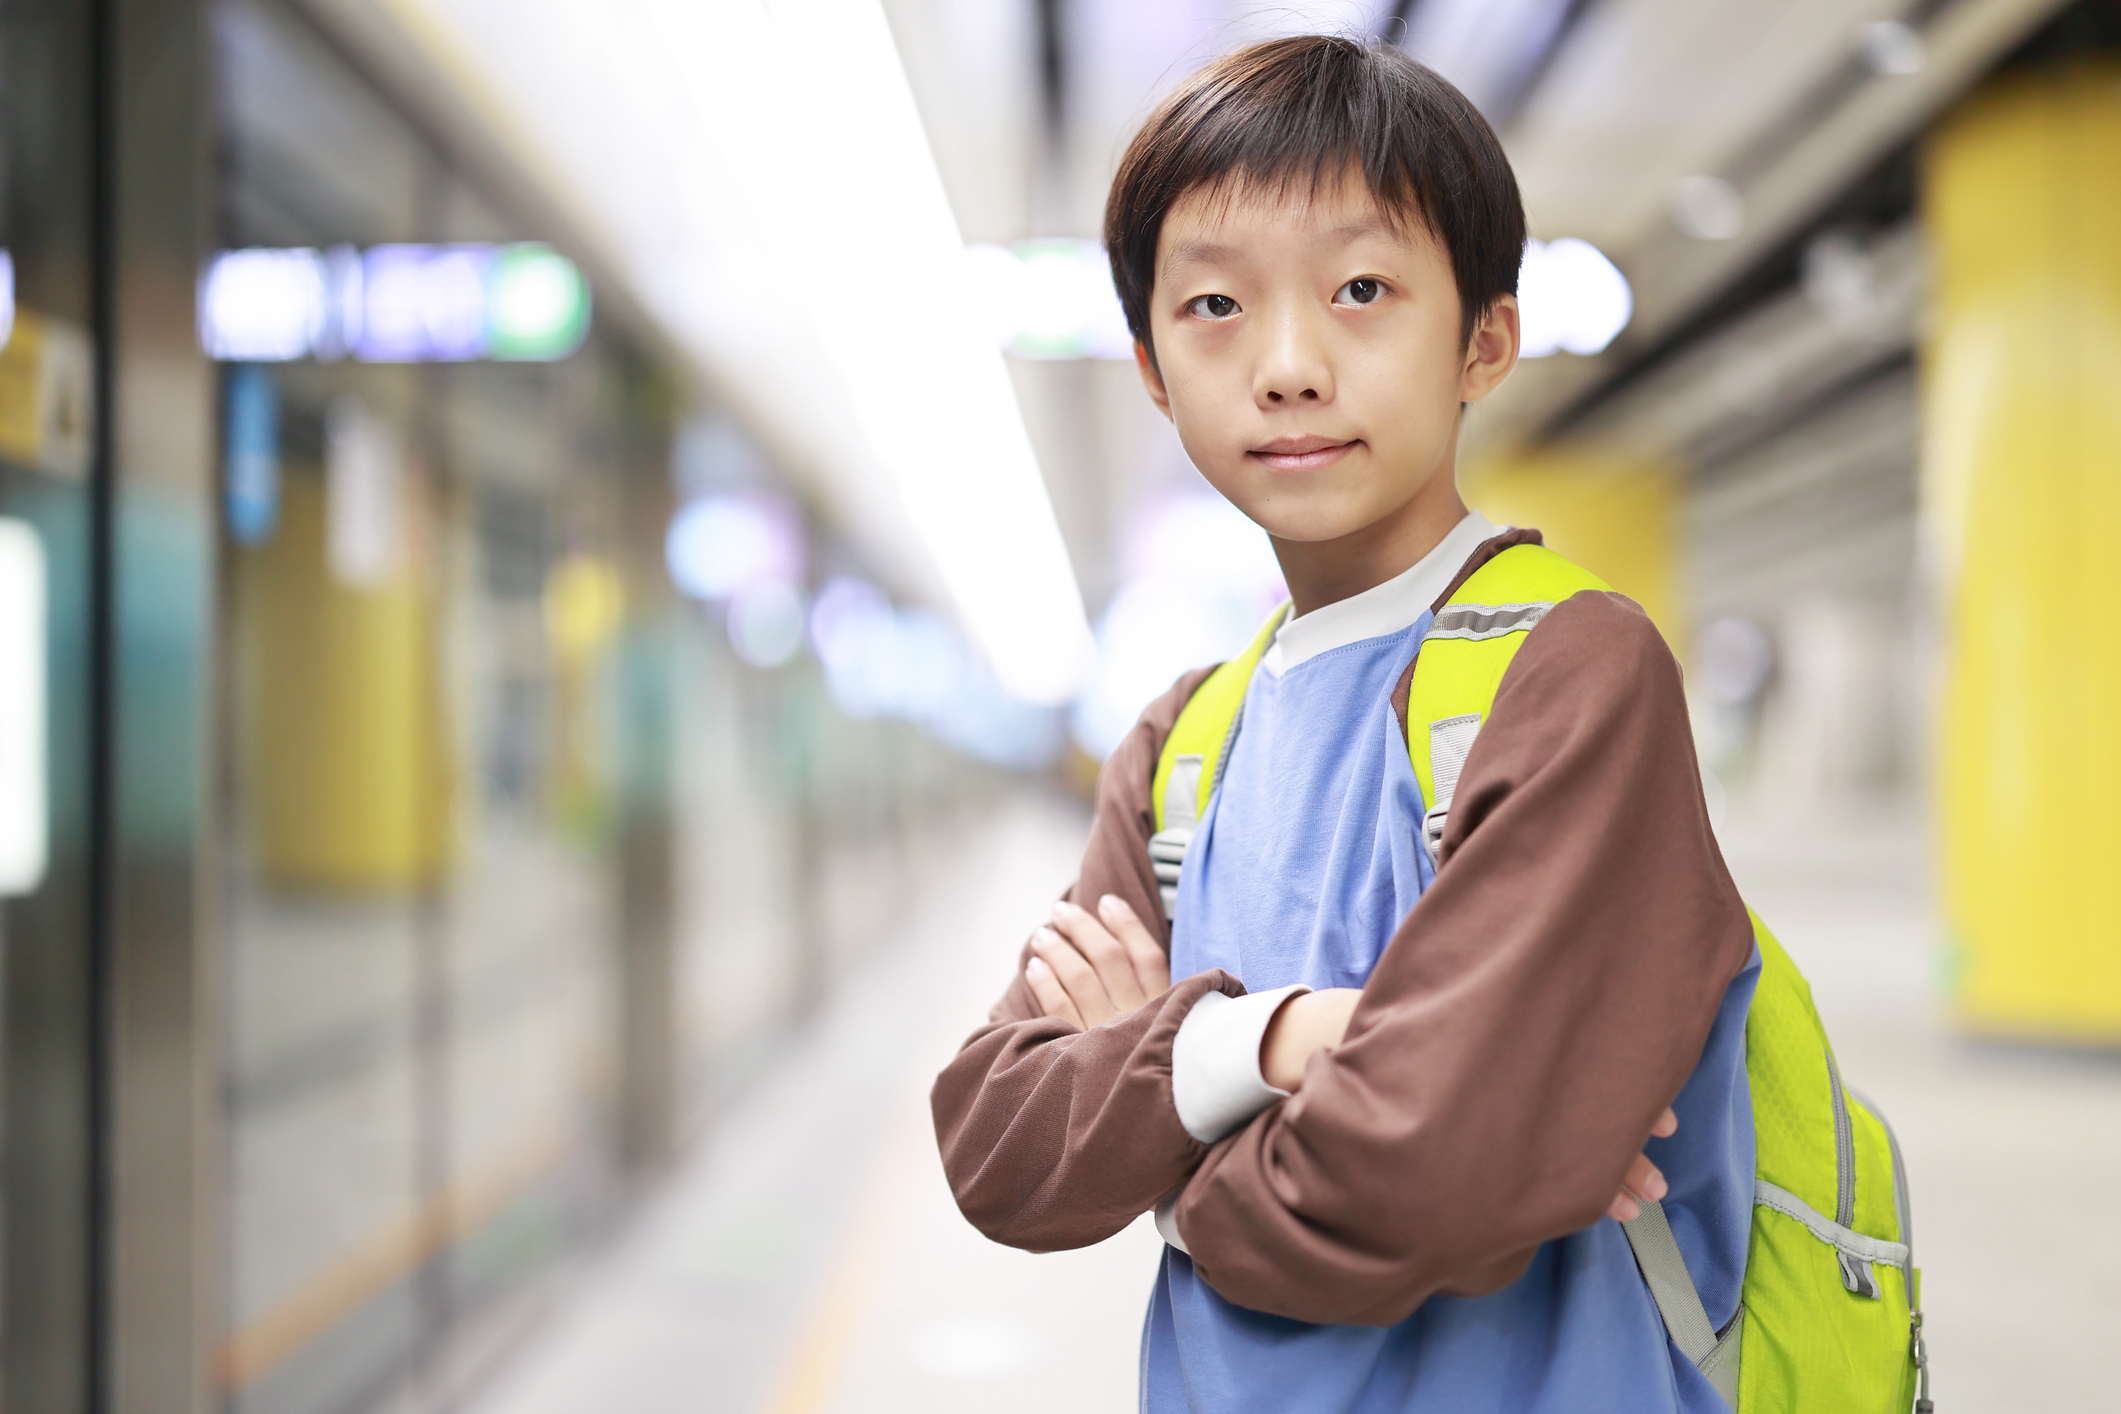 A schoolaged boy wearing a yellow backpack waits on a train platform with his arms crossed in front of him.